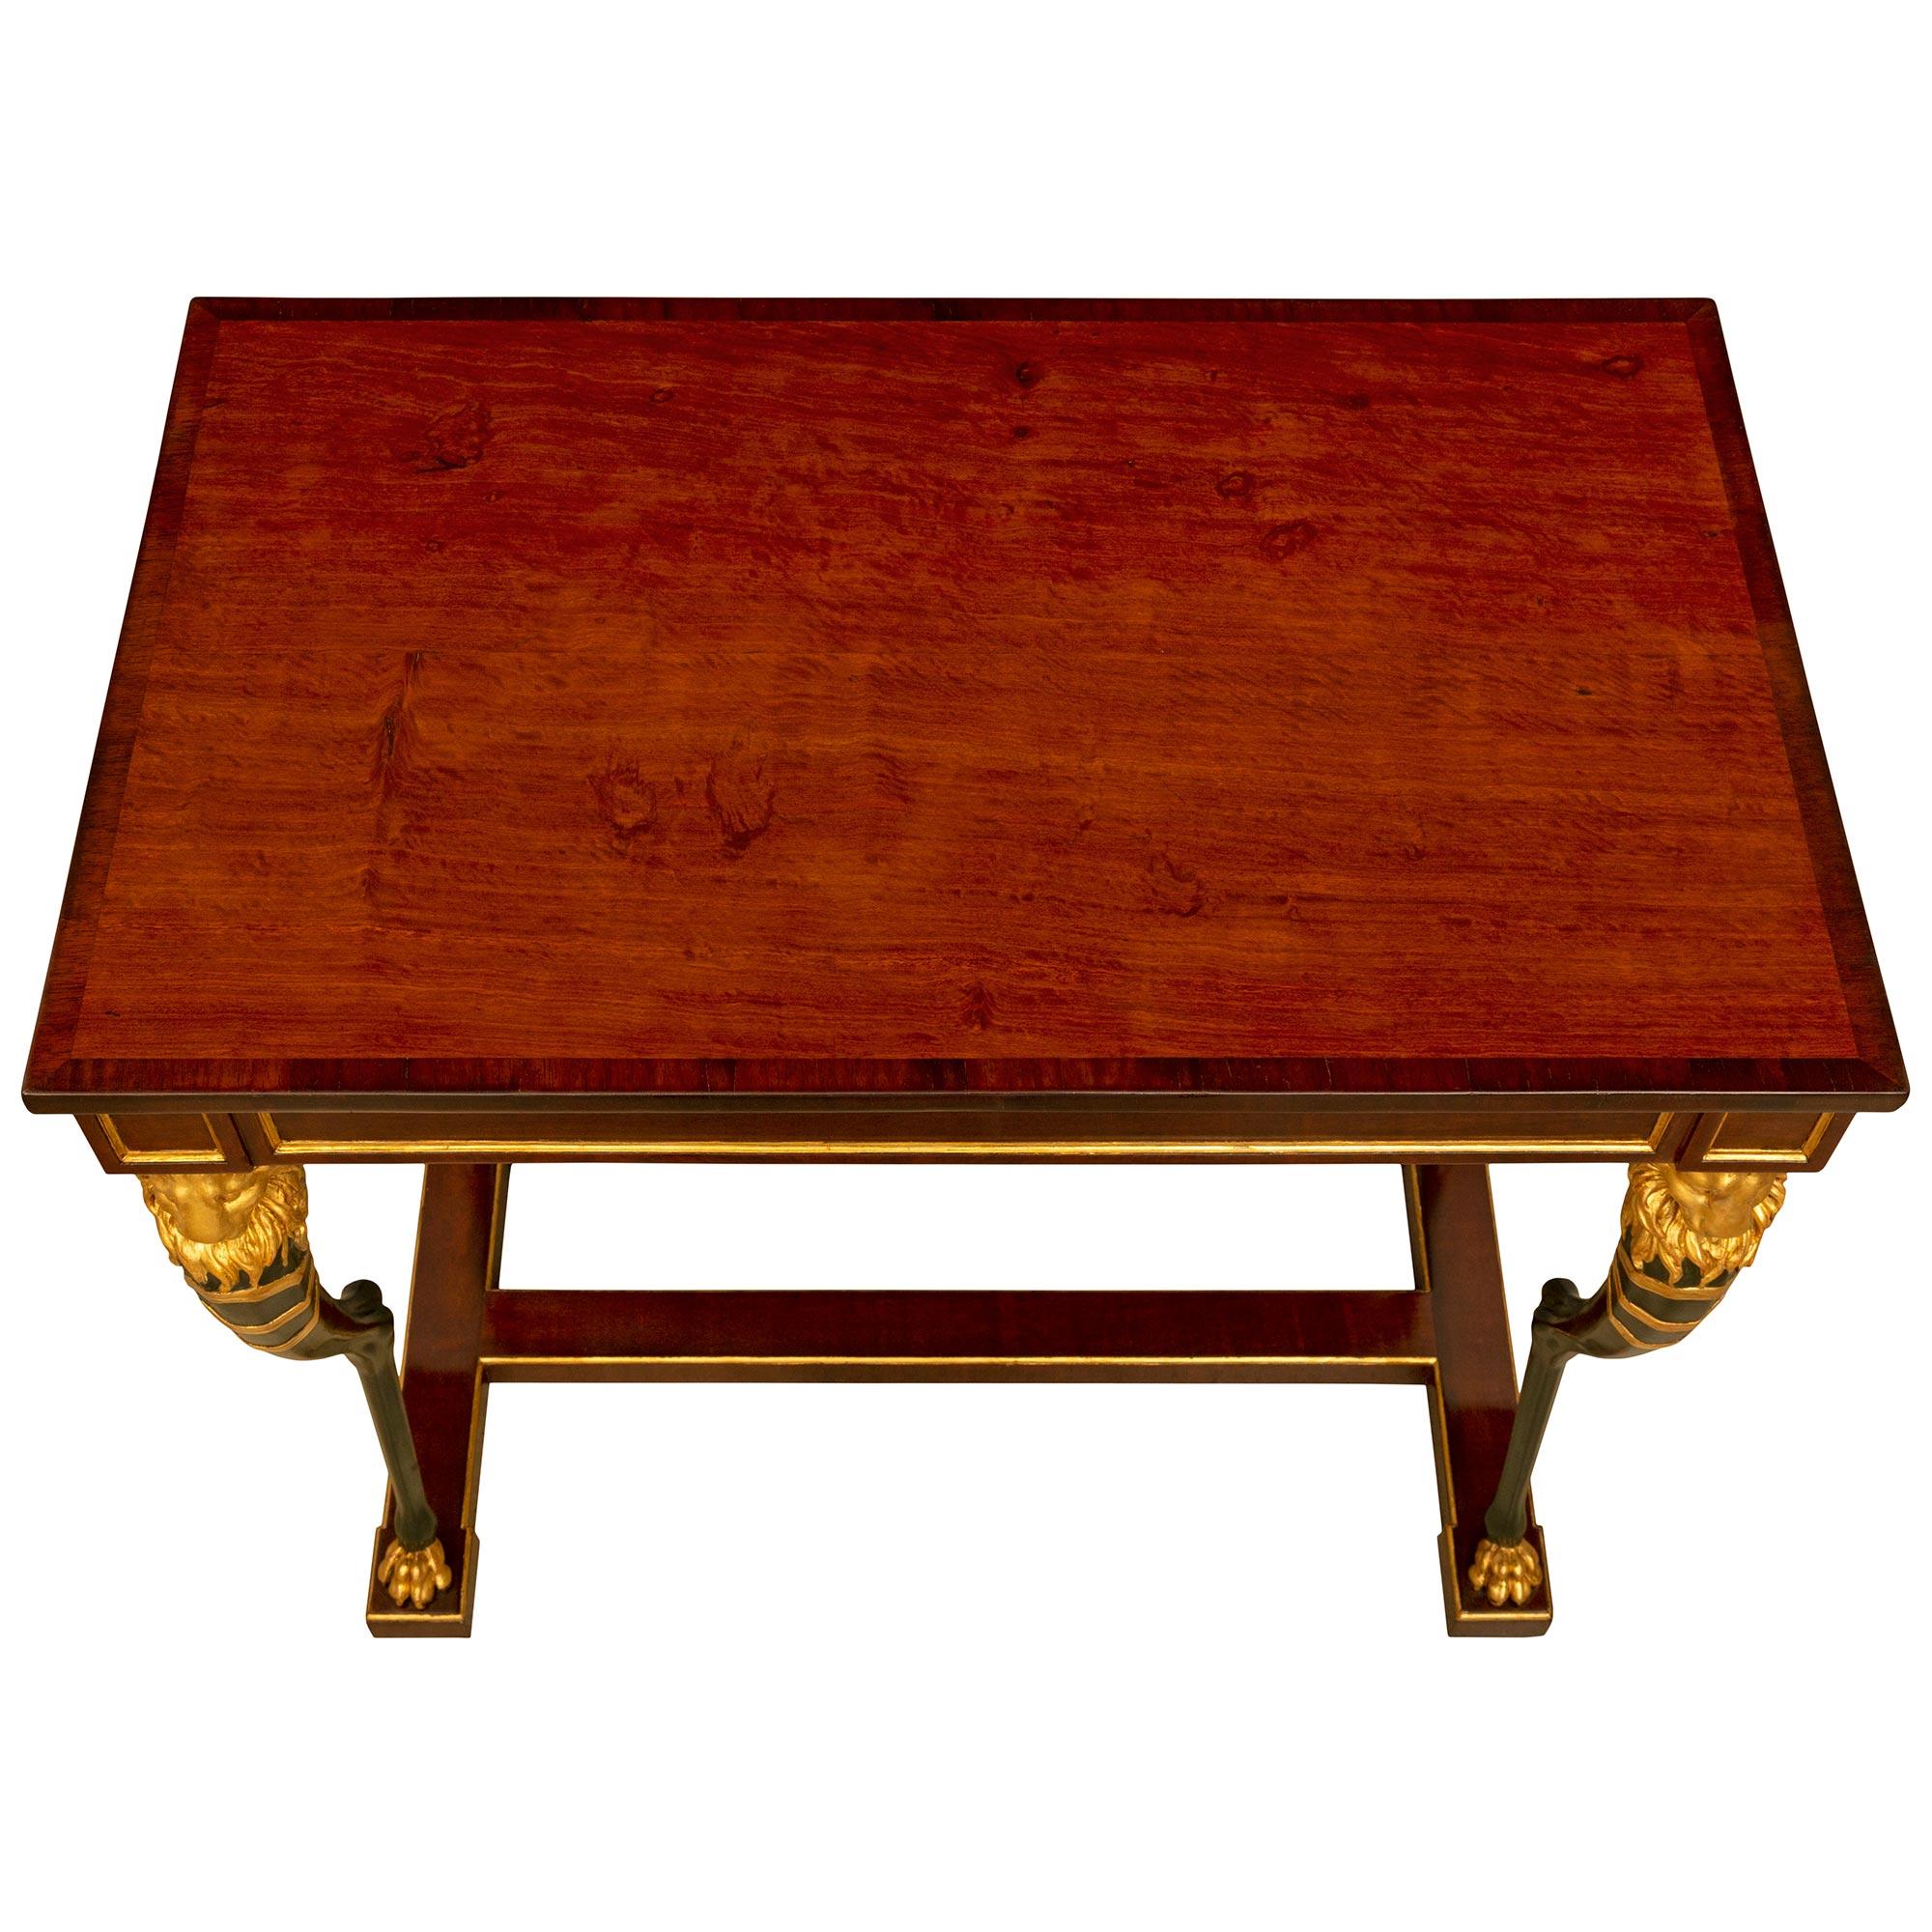 A remarkable and most elegant Swedish 19th century Empire st. Mahogany, polychrome and giltwood center table. The rectangular table is raised by an elegant H shaped bottom mahogany stretcher with a fine mottled giltwood border with striking and